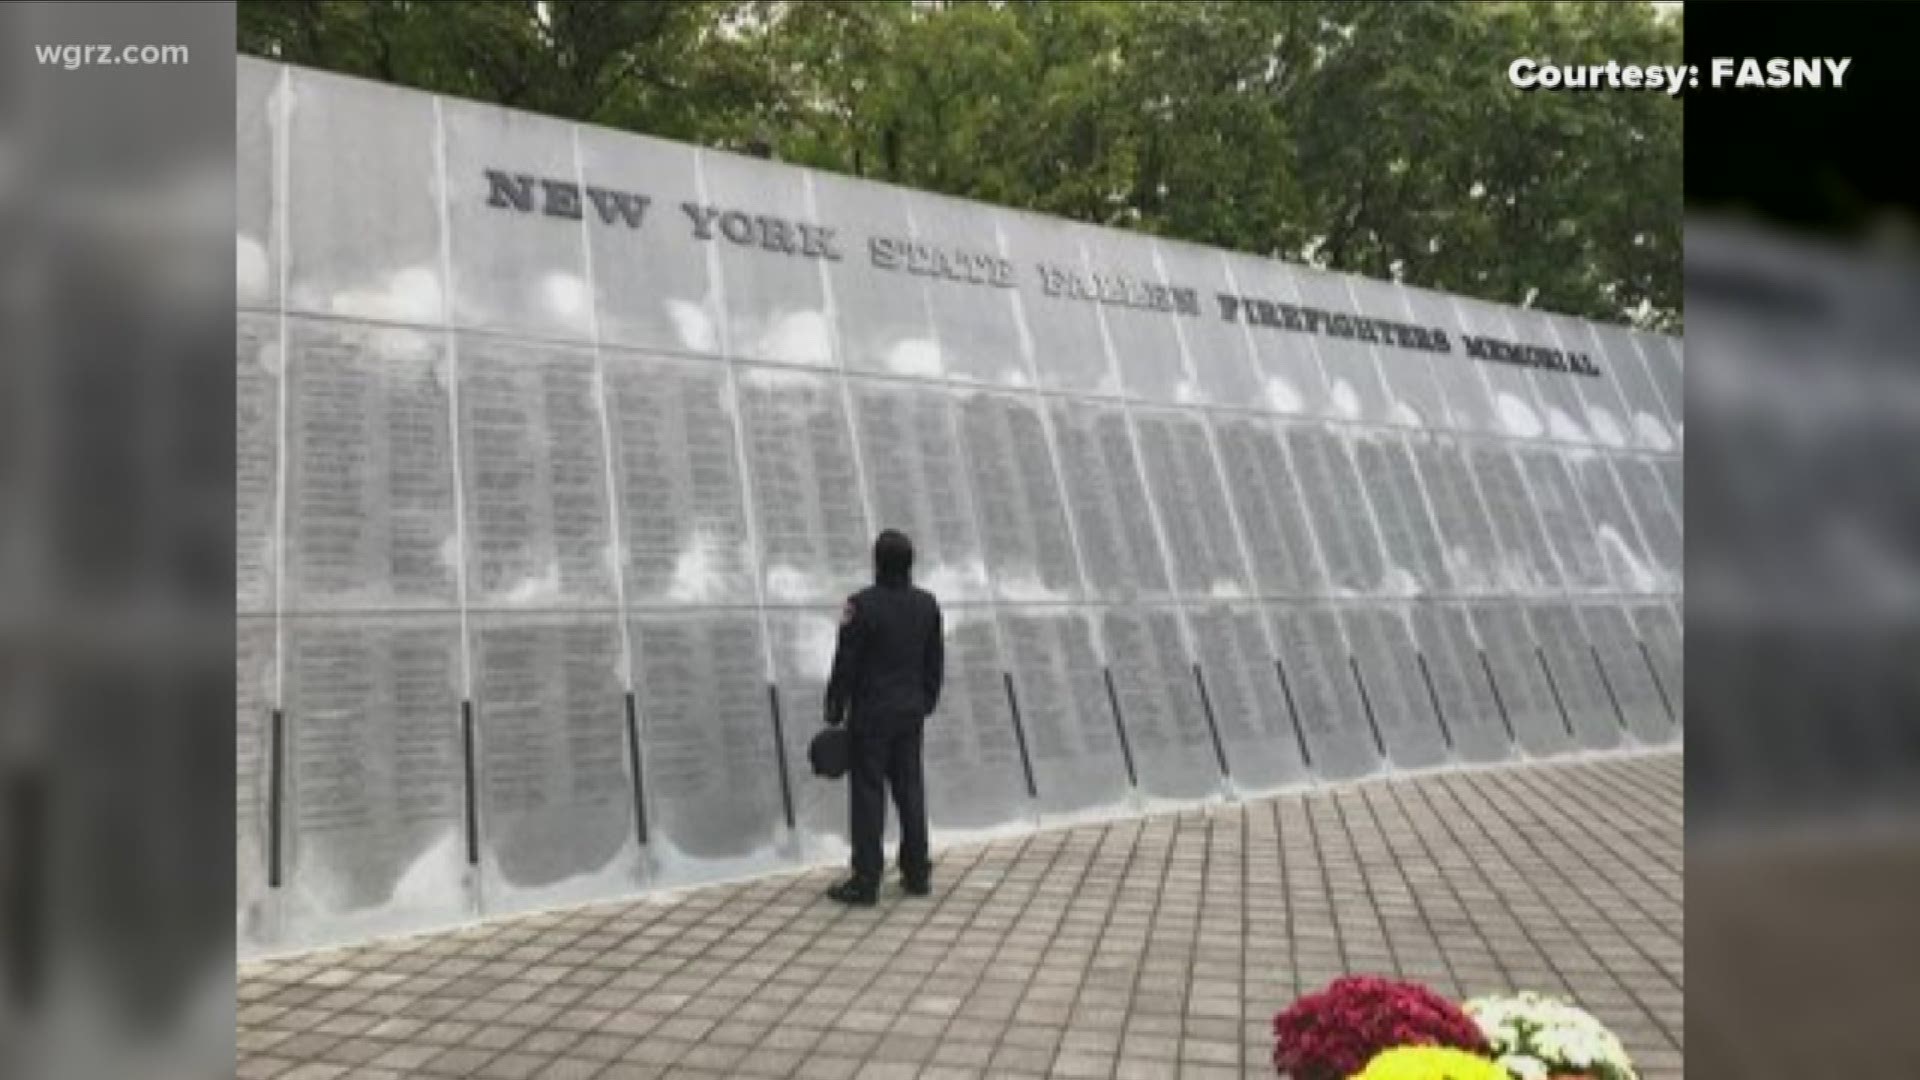 A Western New York firefighter's name has been added to the state's firefighter memorial.